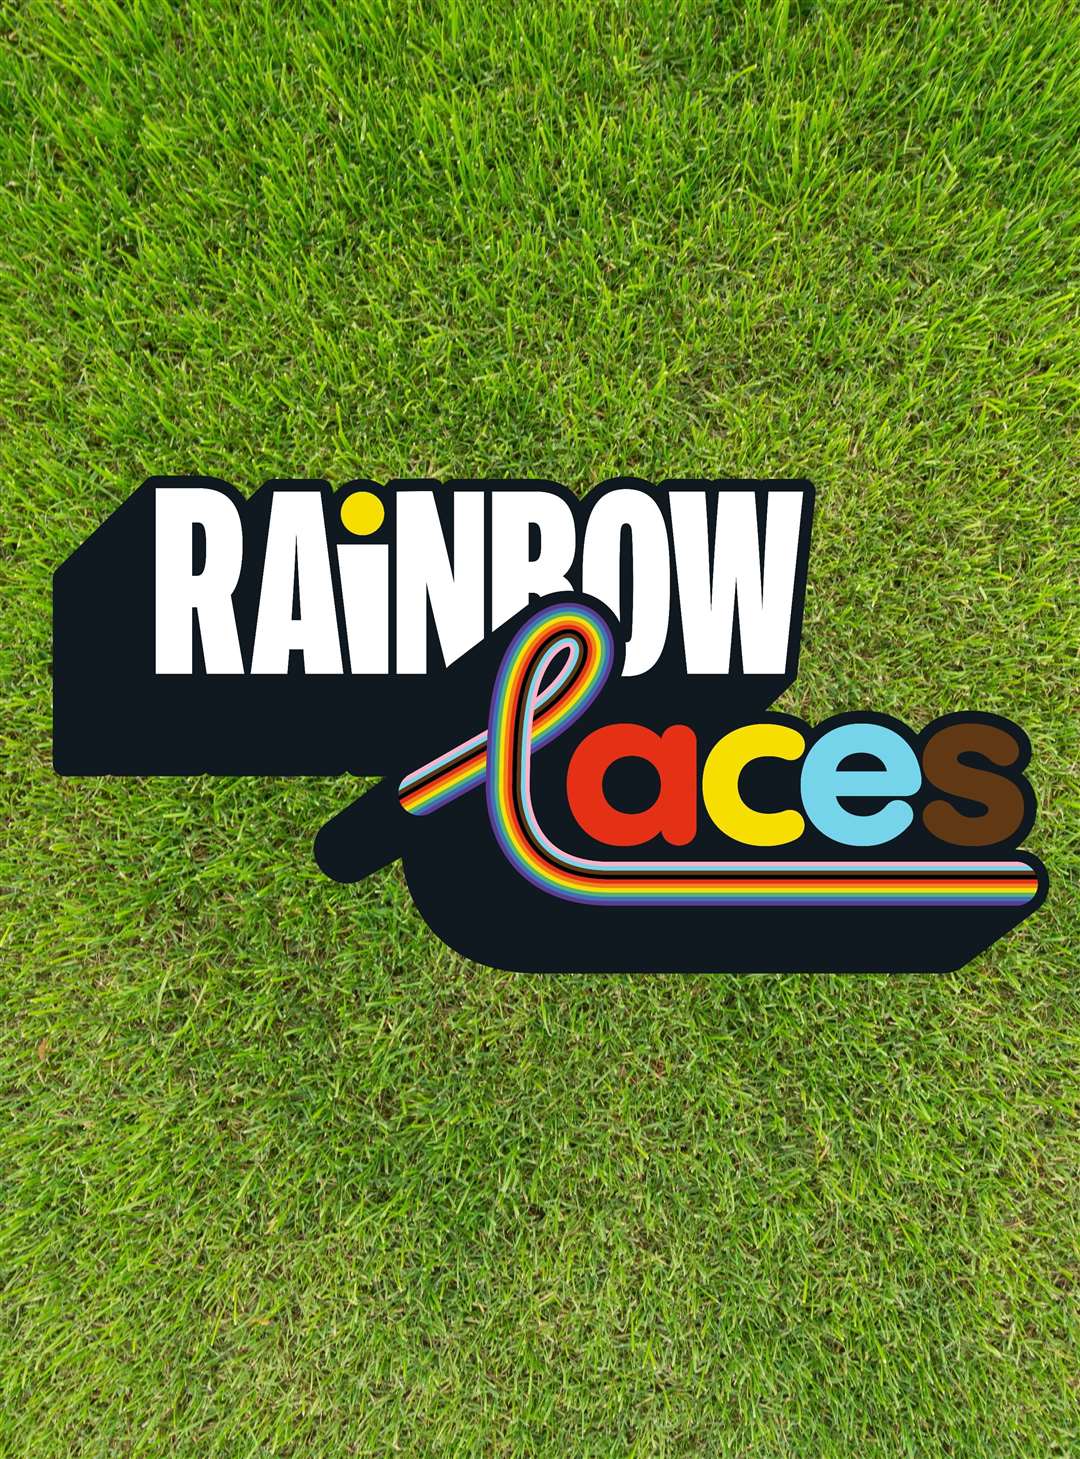 The Rainbow Laces campaign runs from November 25 to December 12.